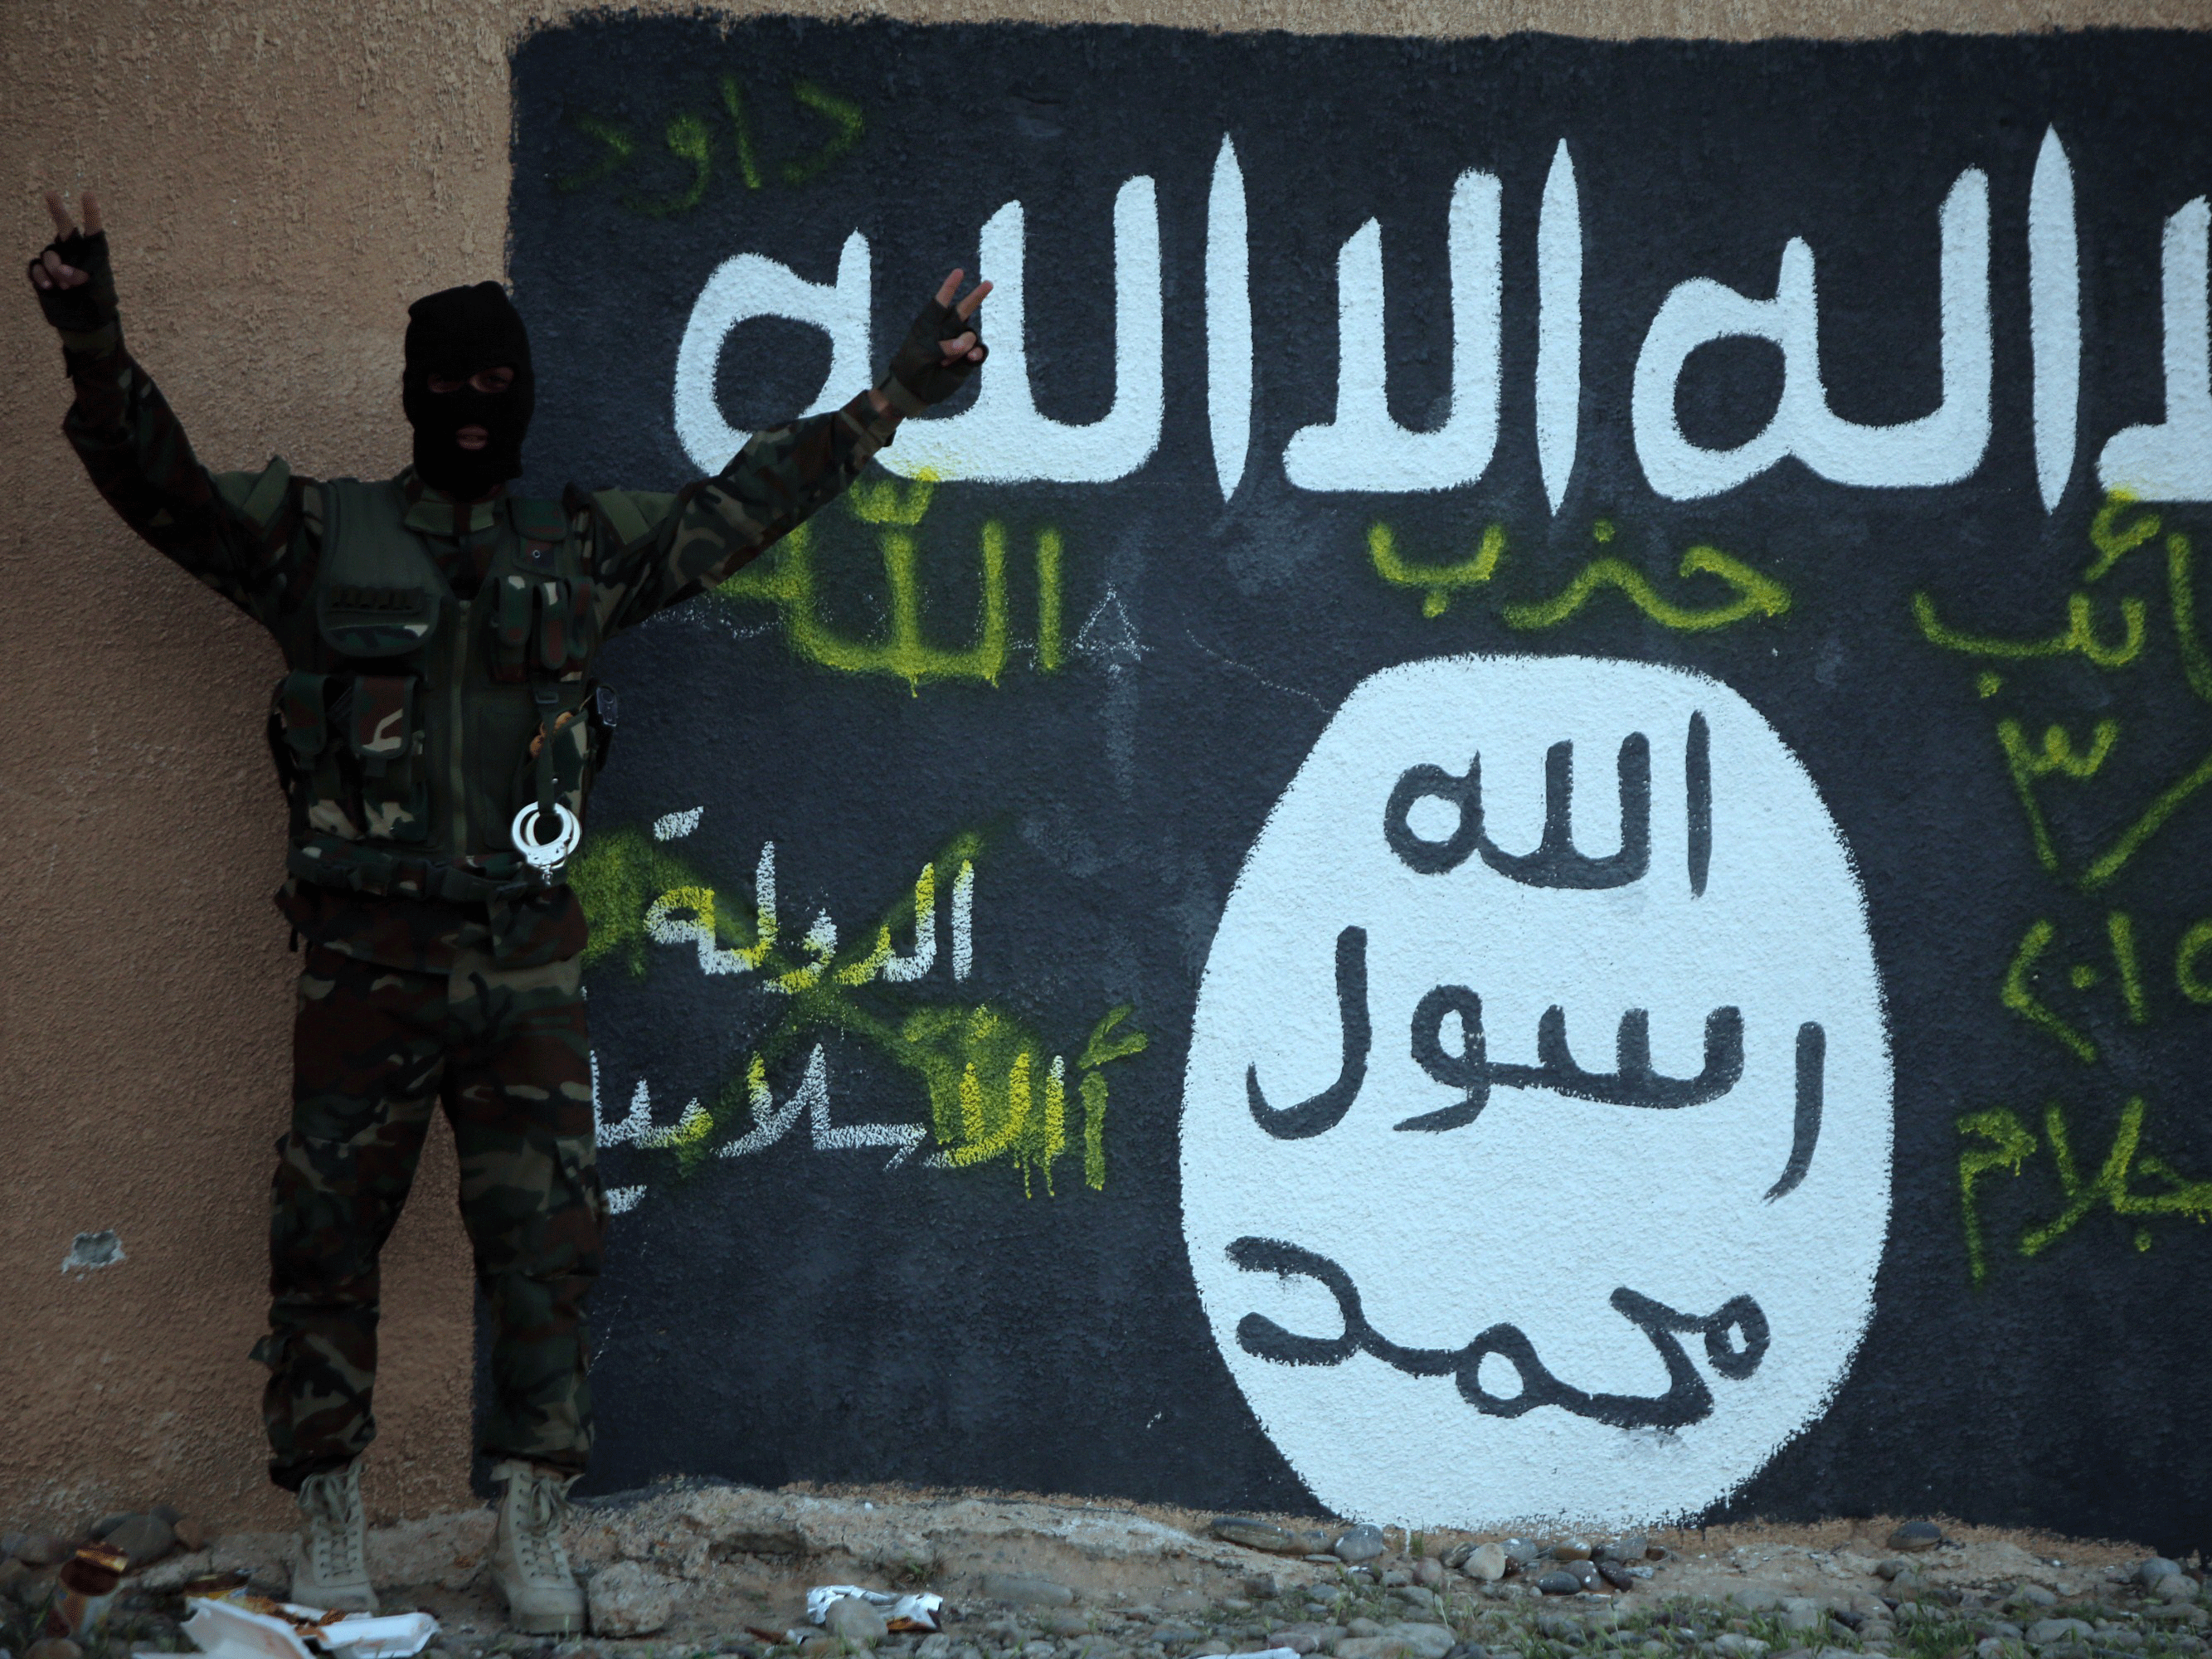 Isis claim to have leaked the email addresses of military and political workers